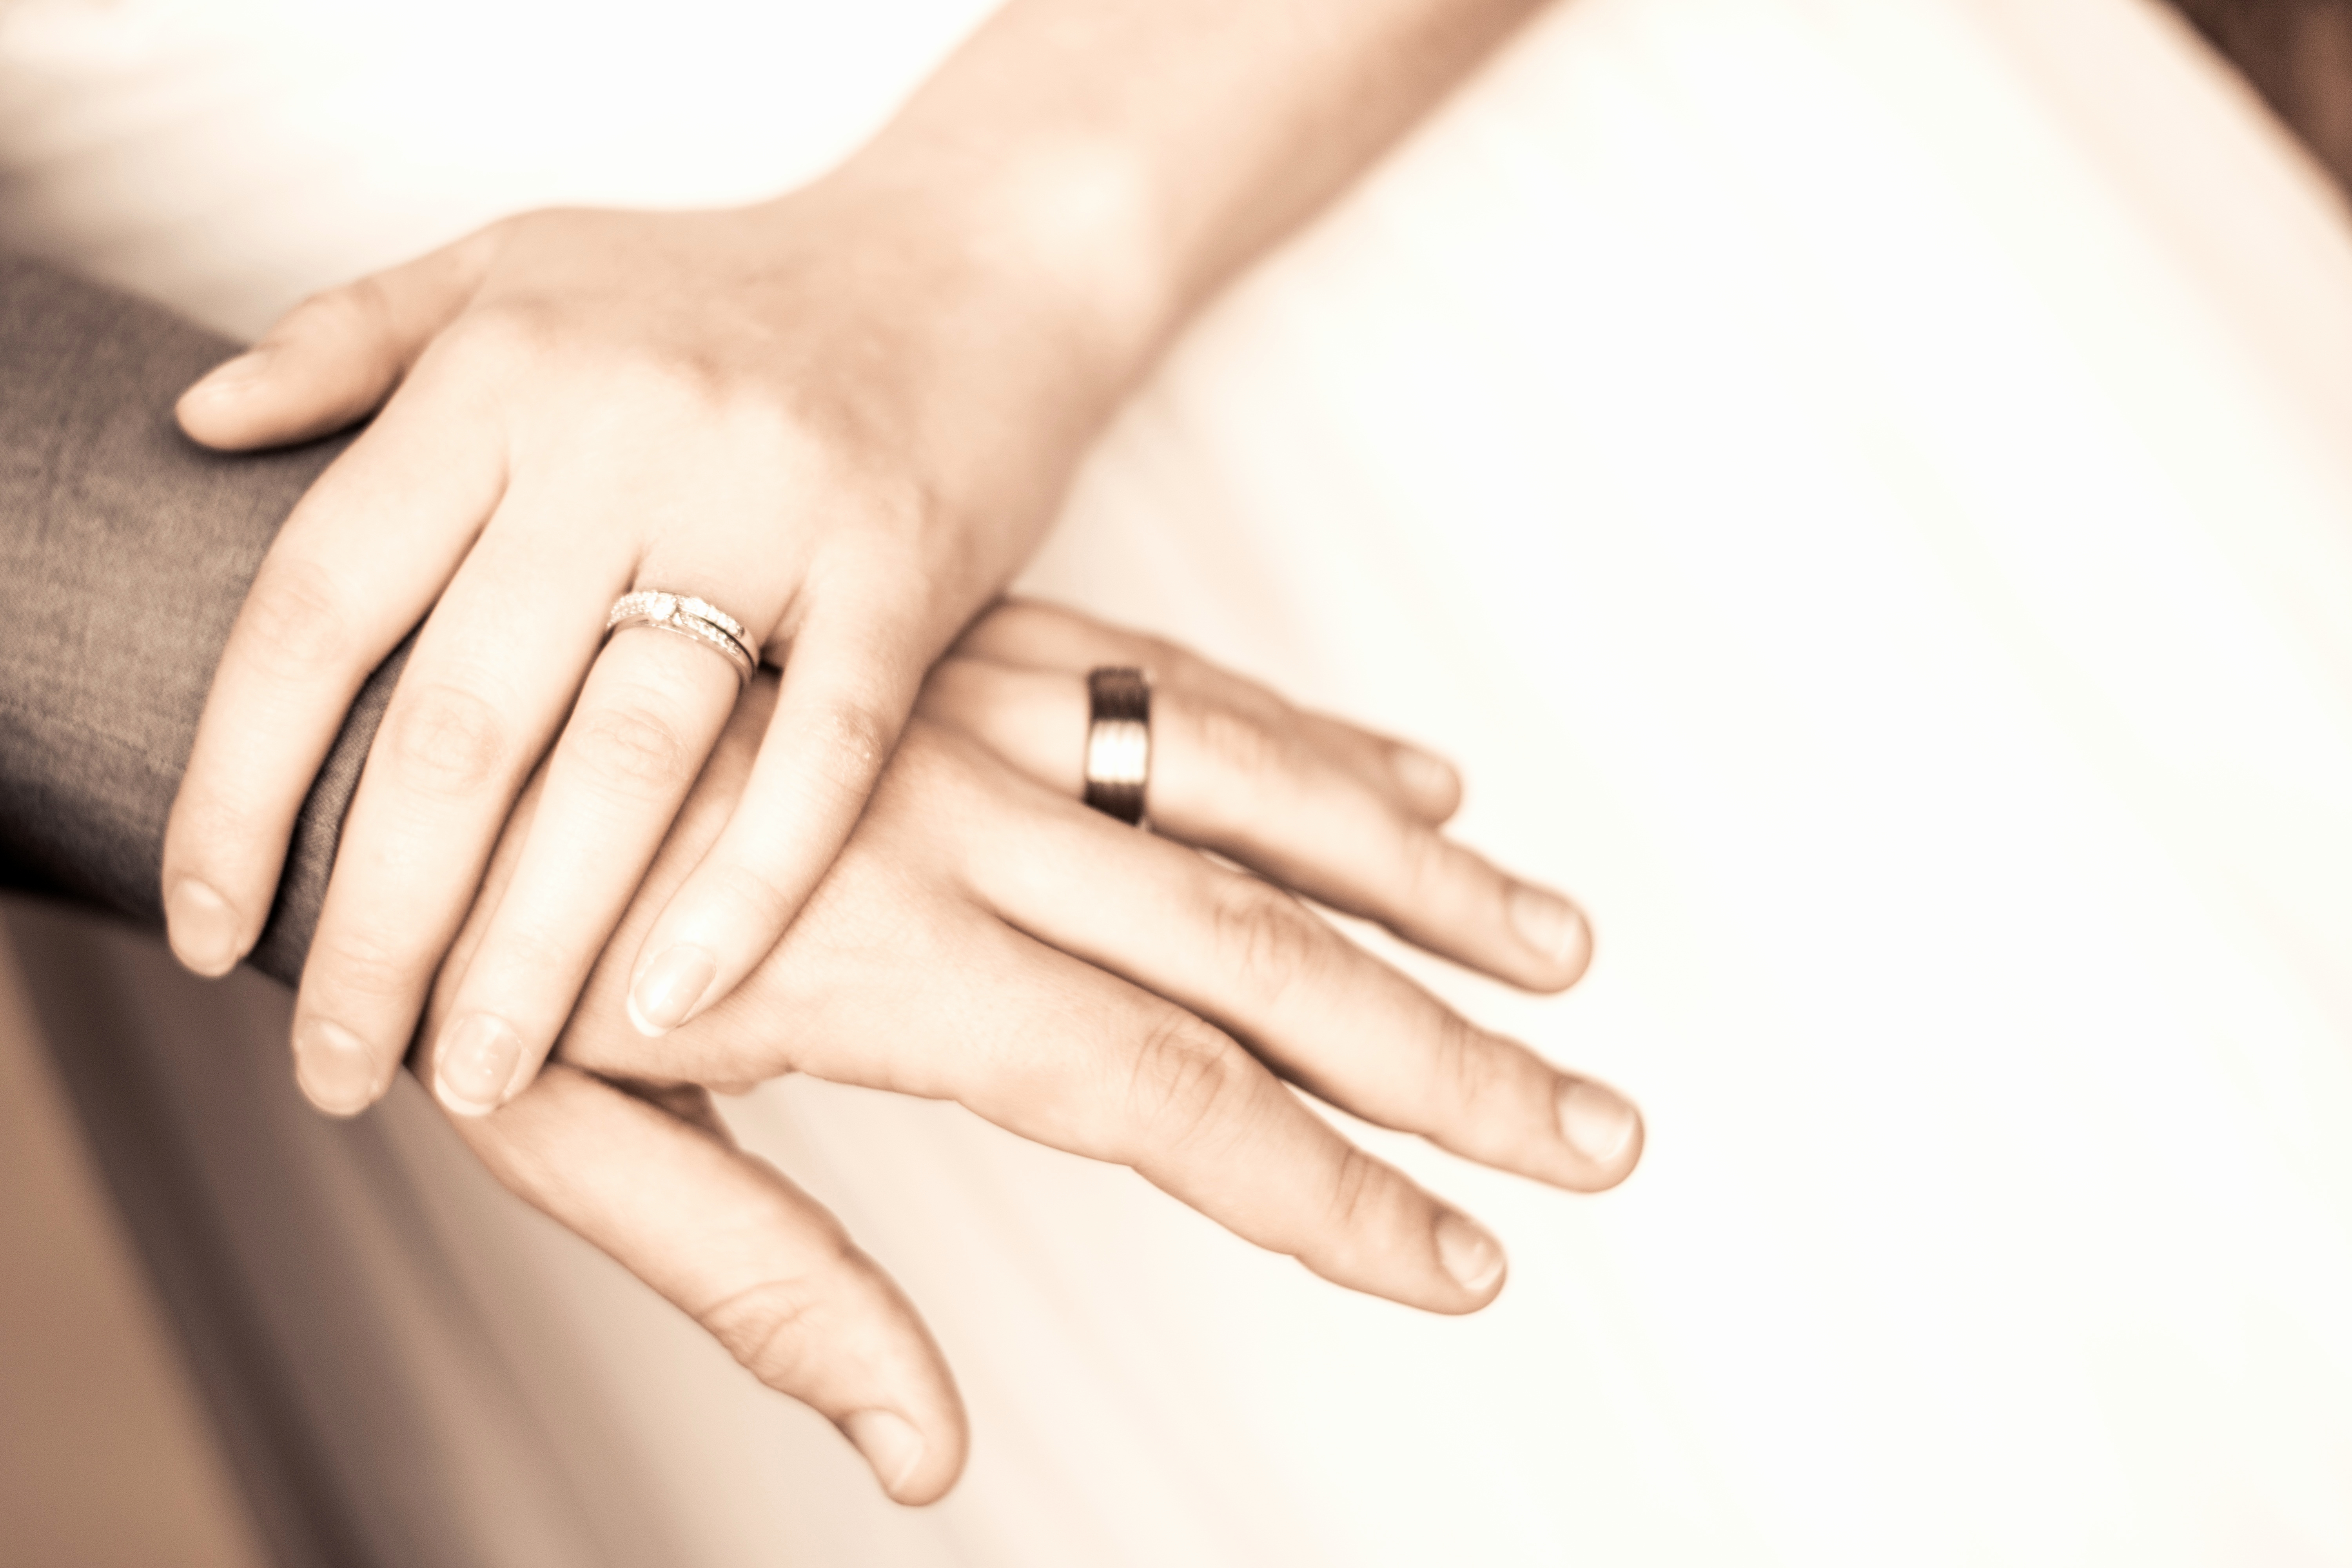 Wedding Rings On Hands New Close Up Of Couple Holding Hands · Free ...